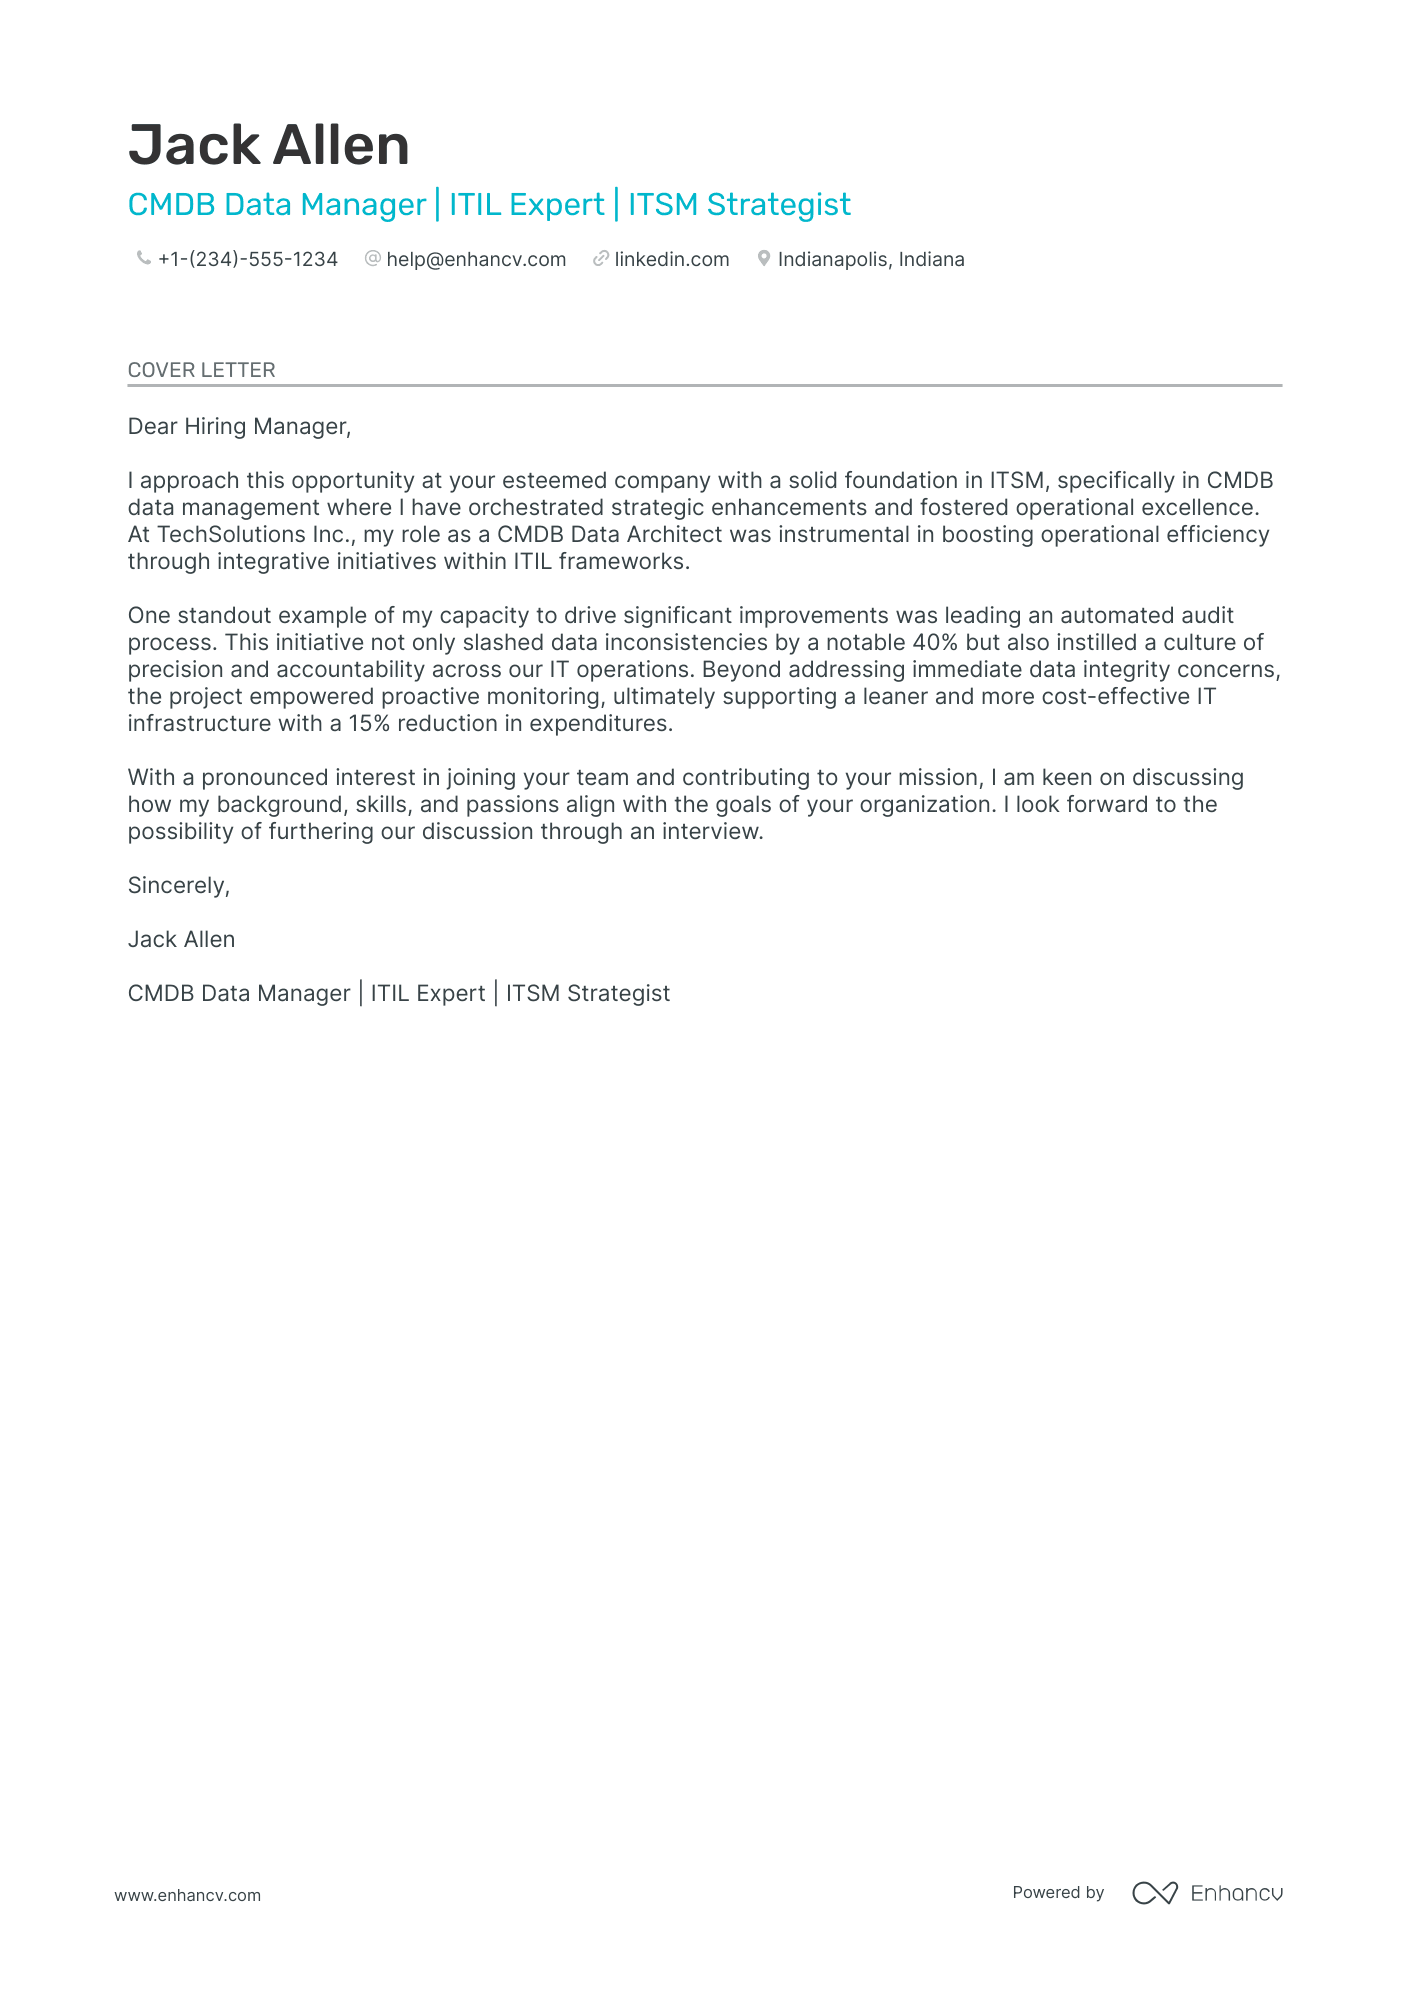 Servicenow Business Analyst cover letter